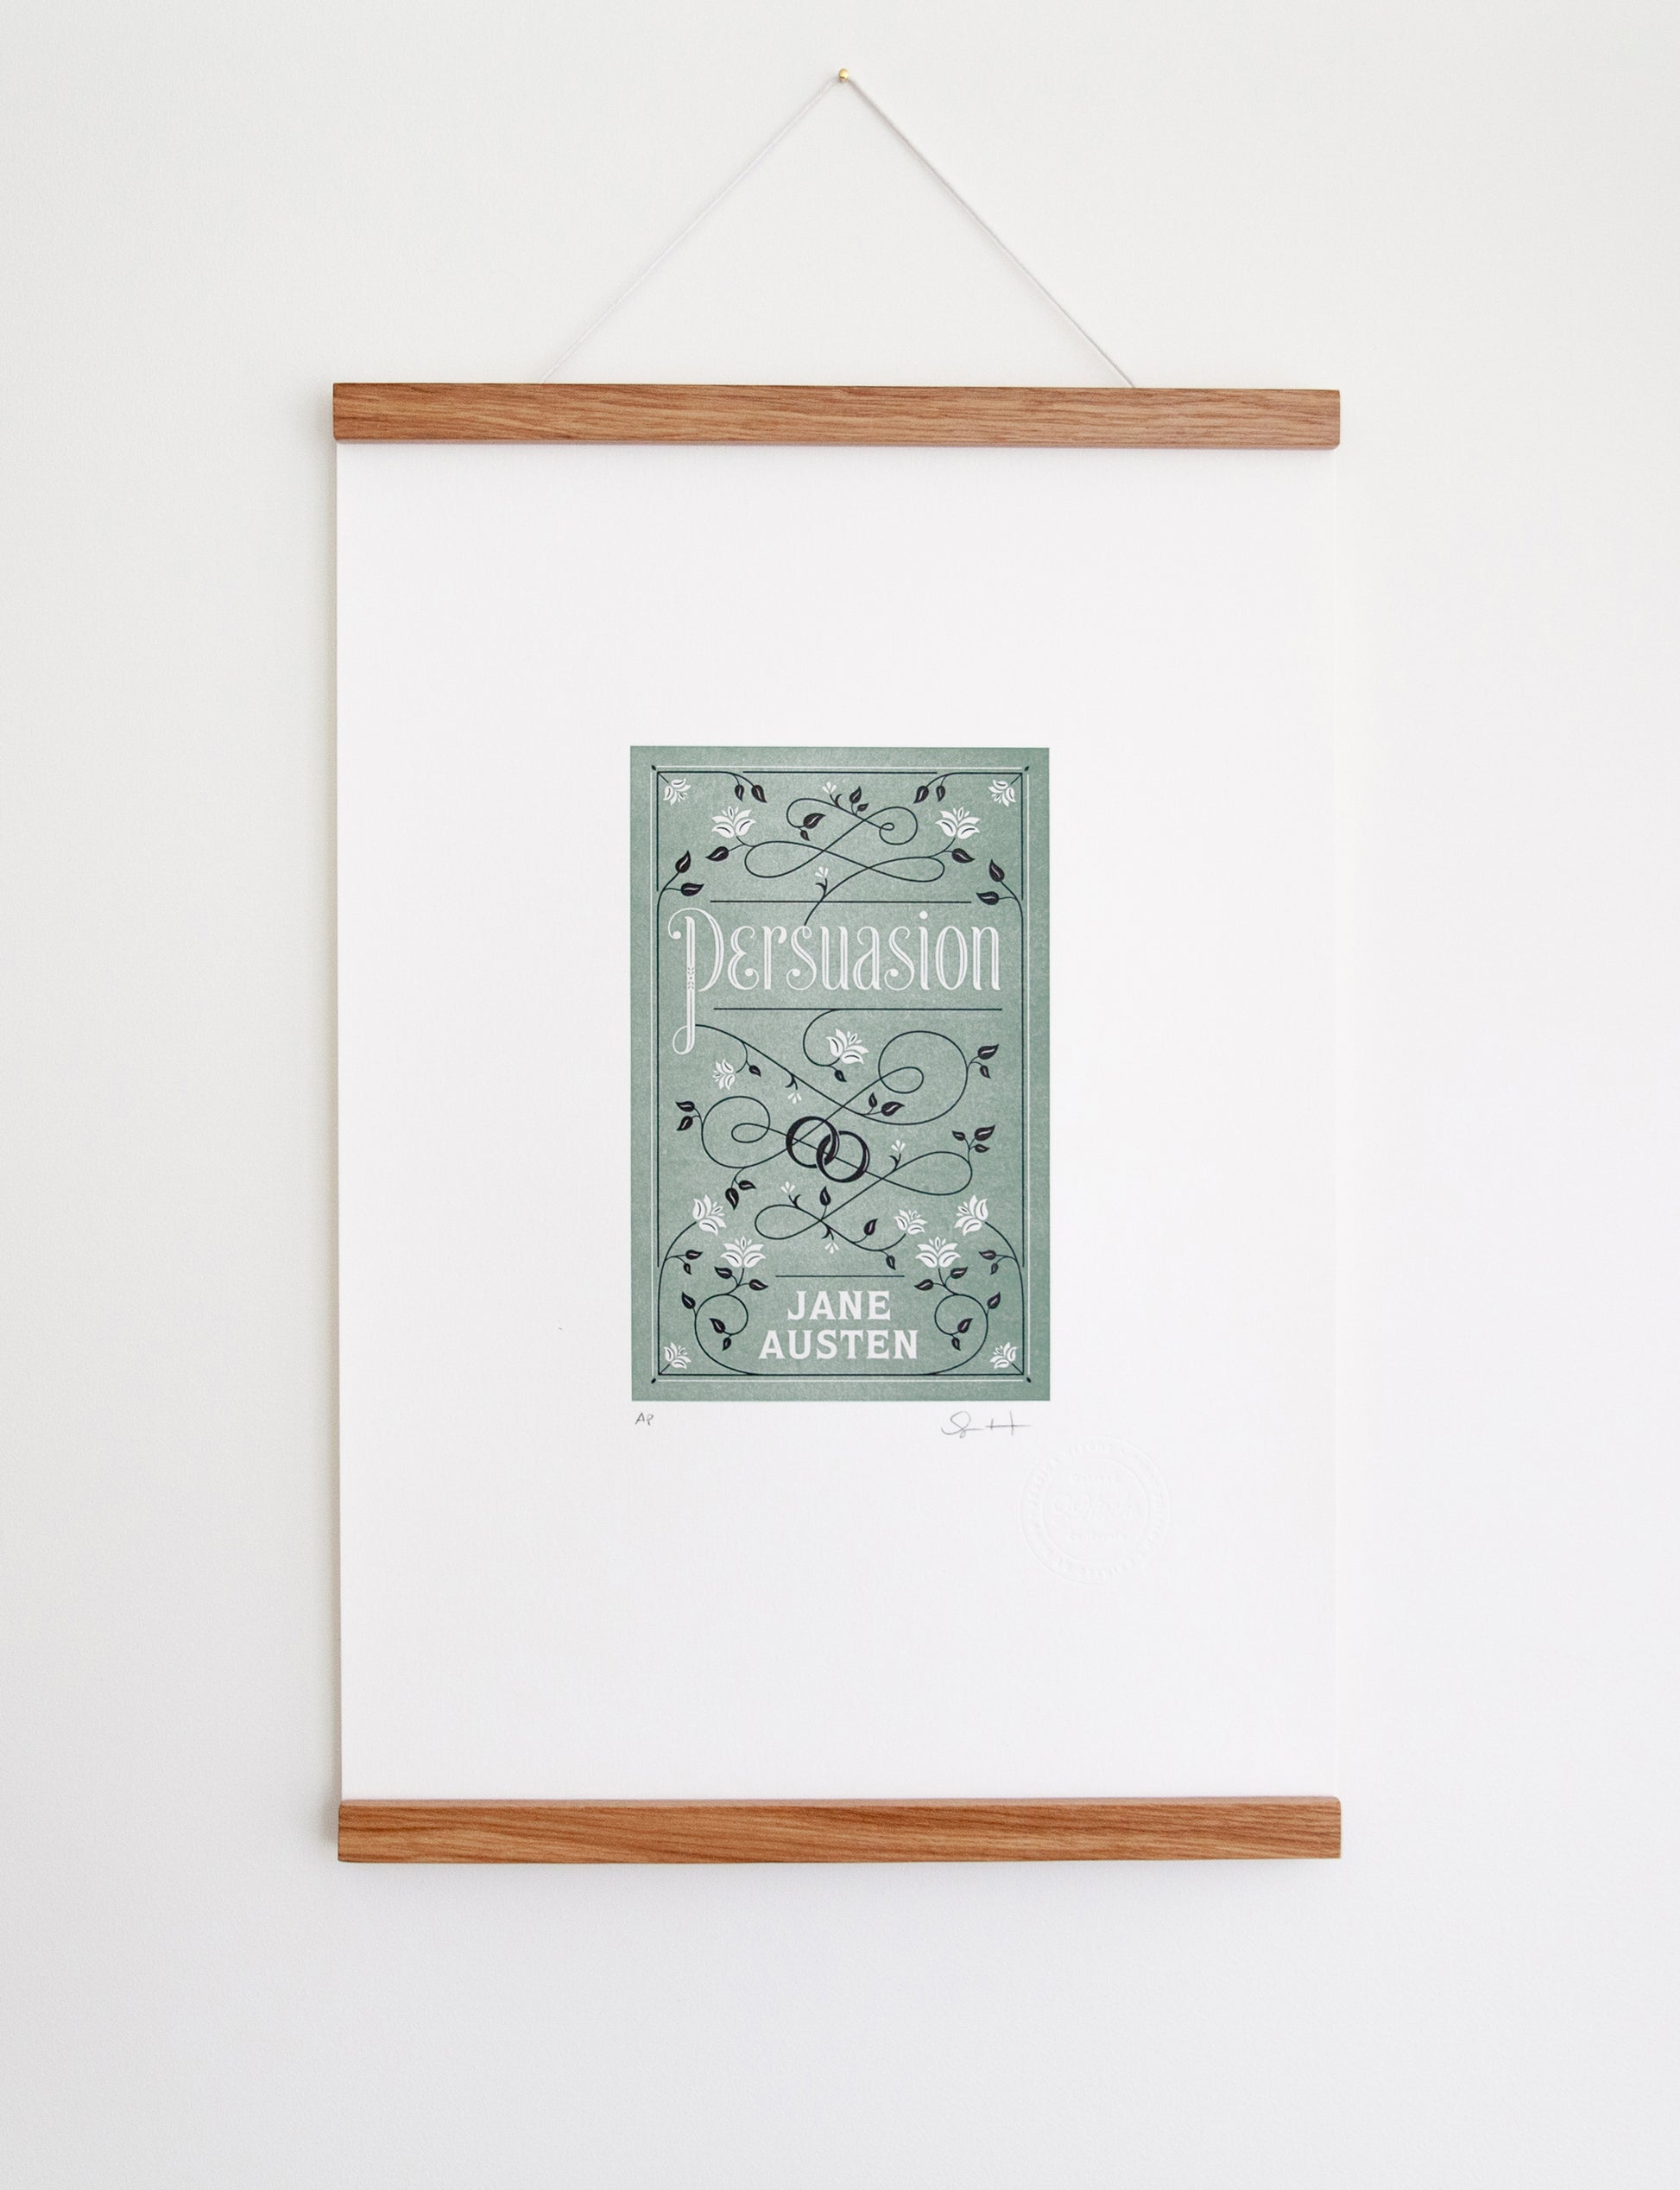 Framed 2-color letterpress print in green and black. Printed artwork is an illustrated book cover of Persuasion including custom hand lettering.